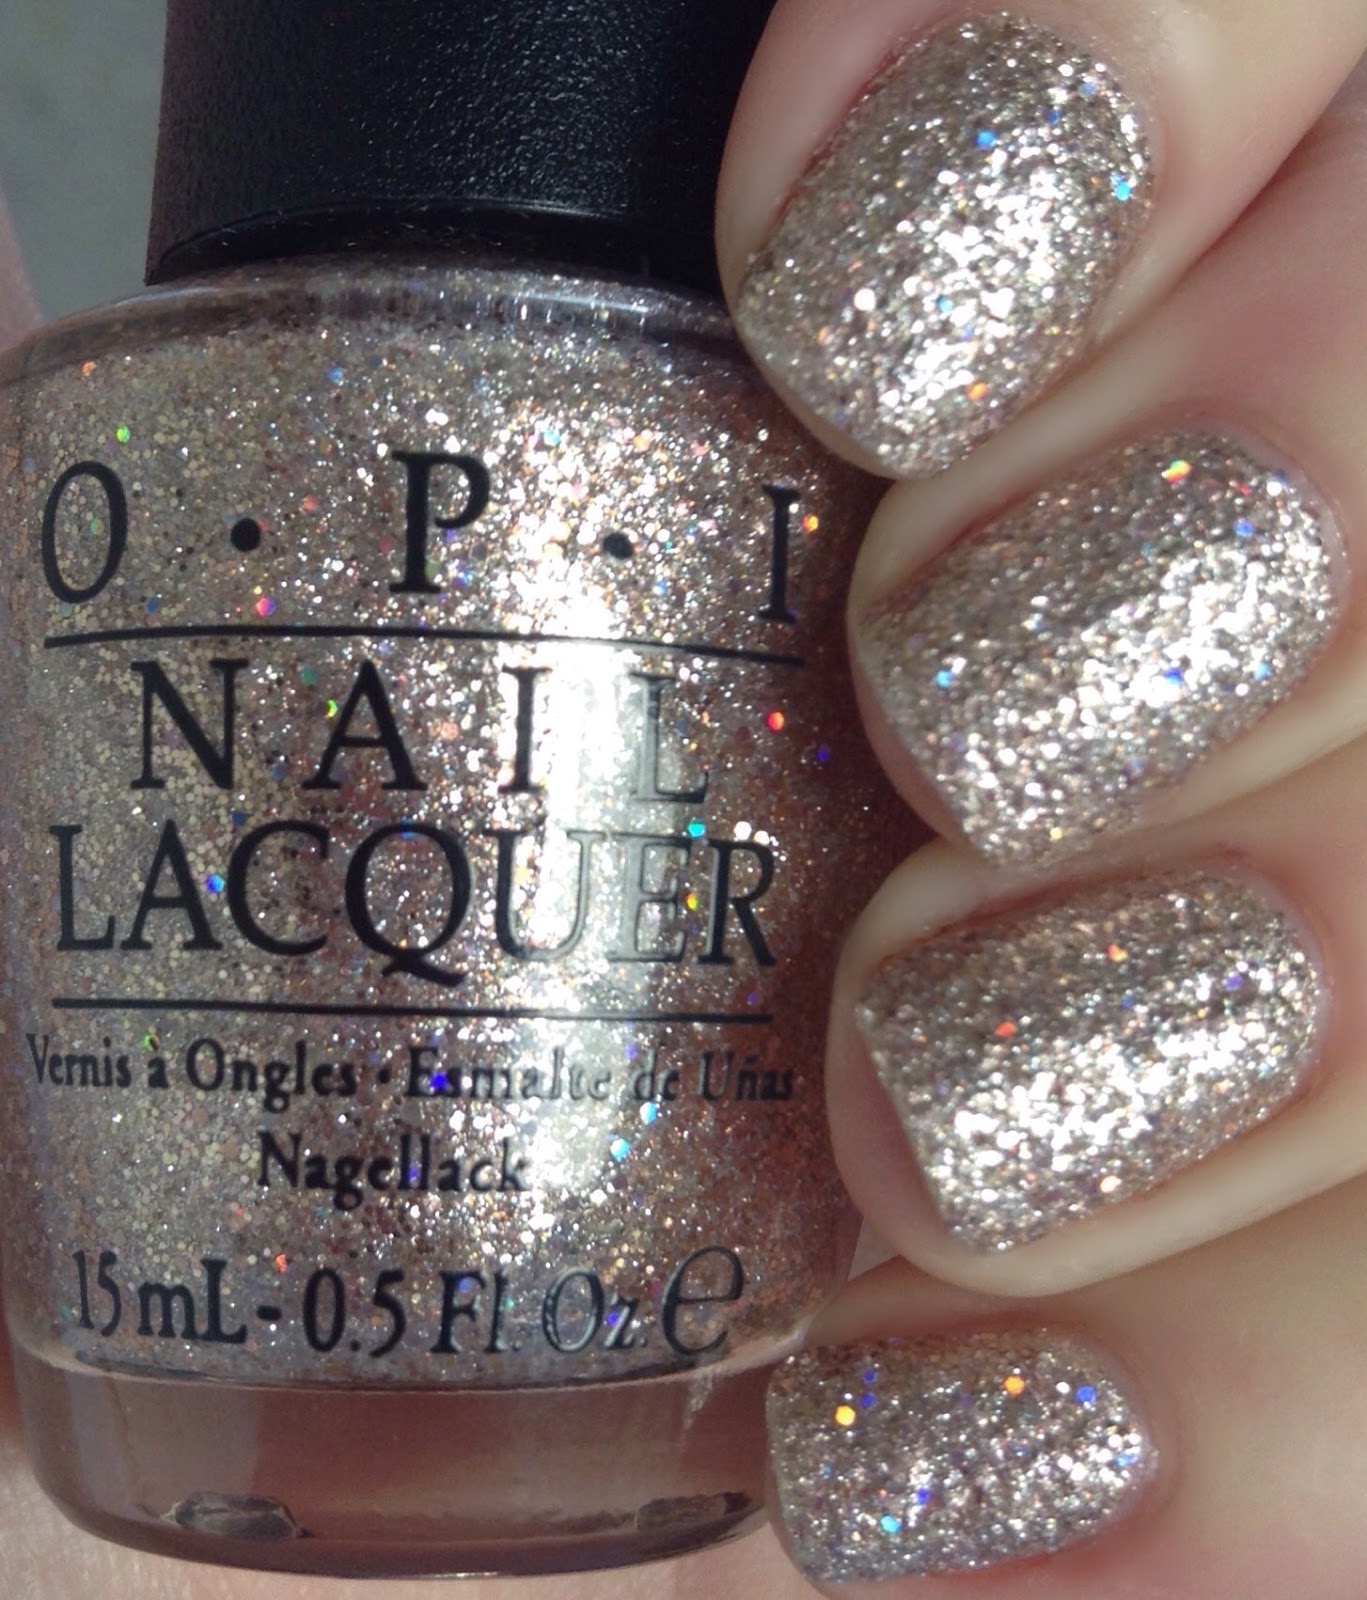 Don's Nail OBSESSION!: OPI STARLIGHT COLLECTION - SWATCHES & REVIEW